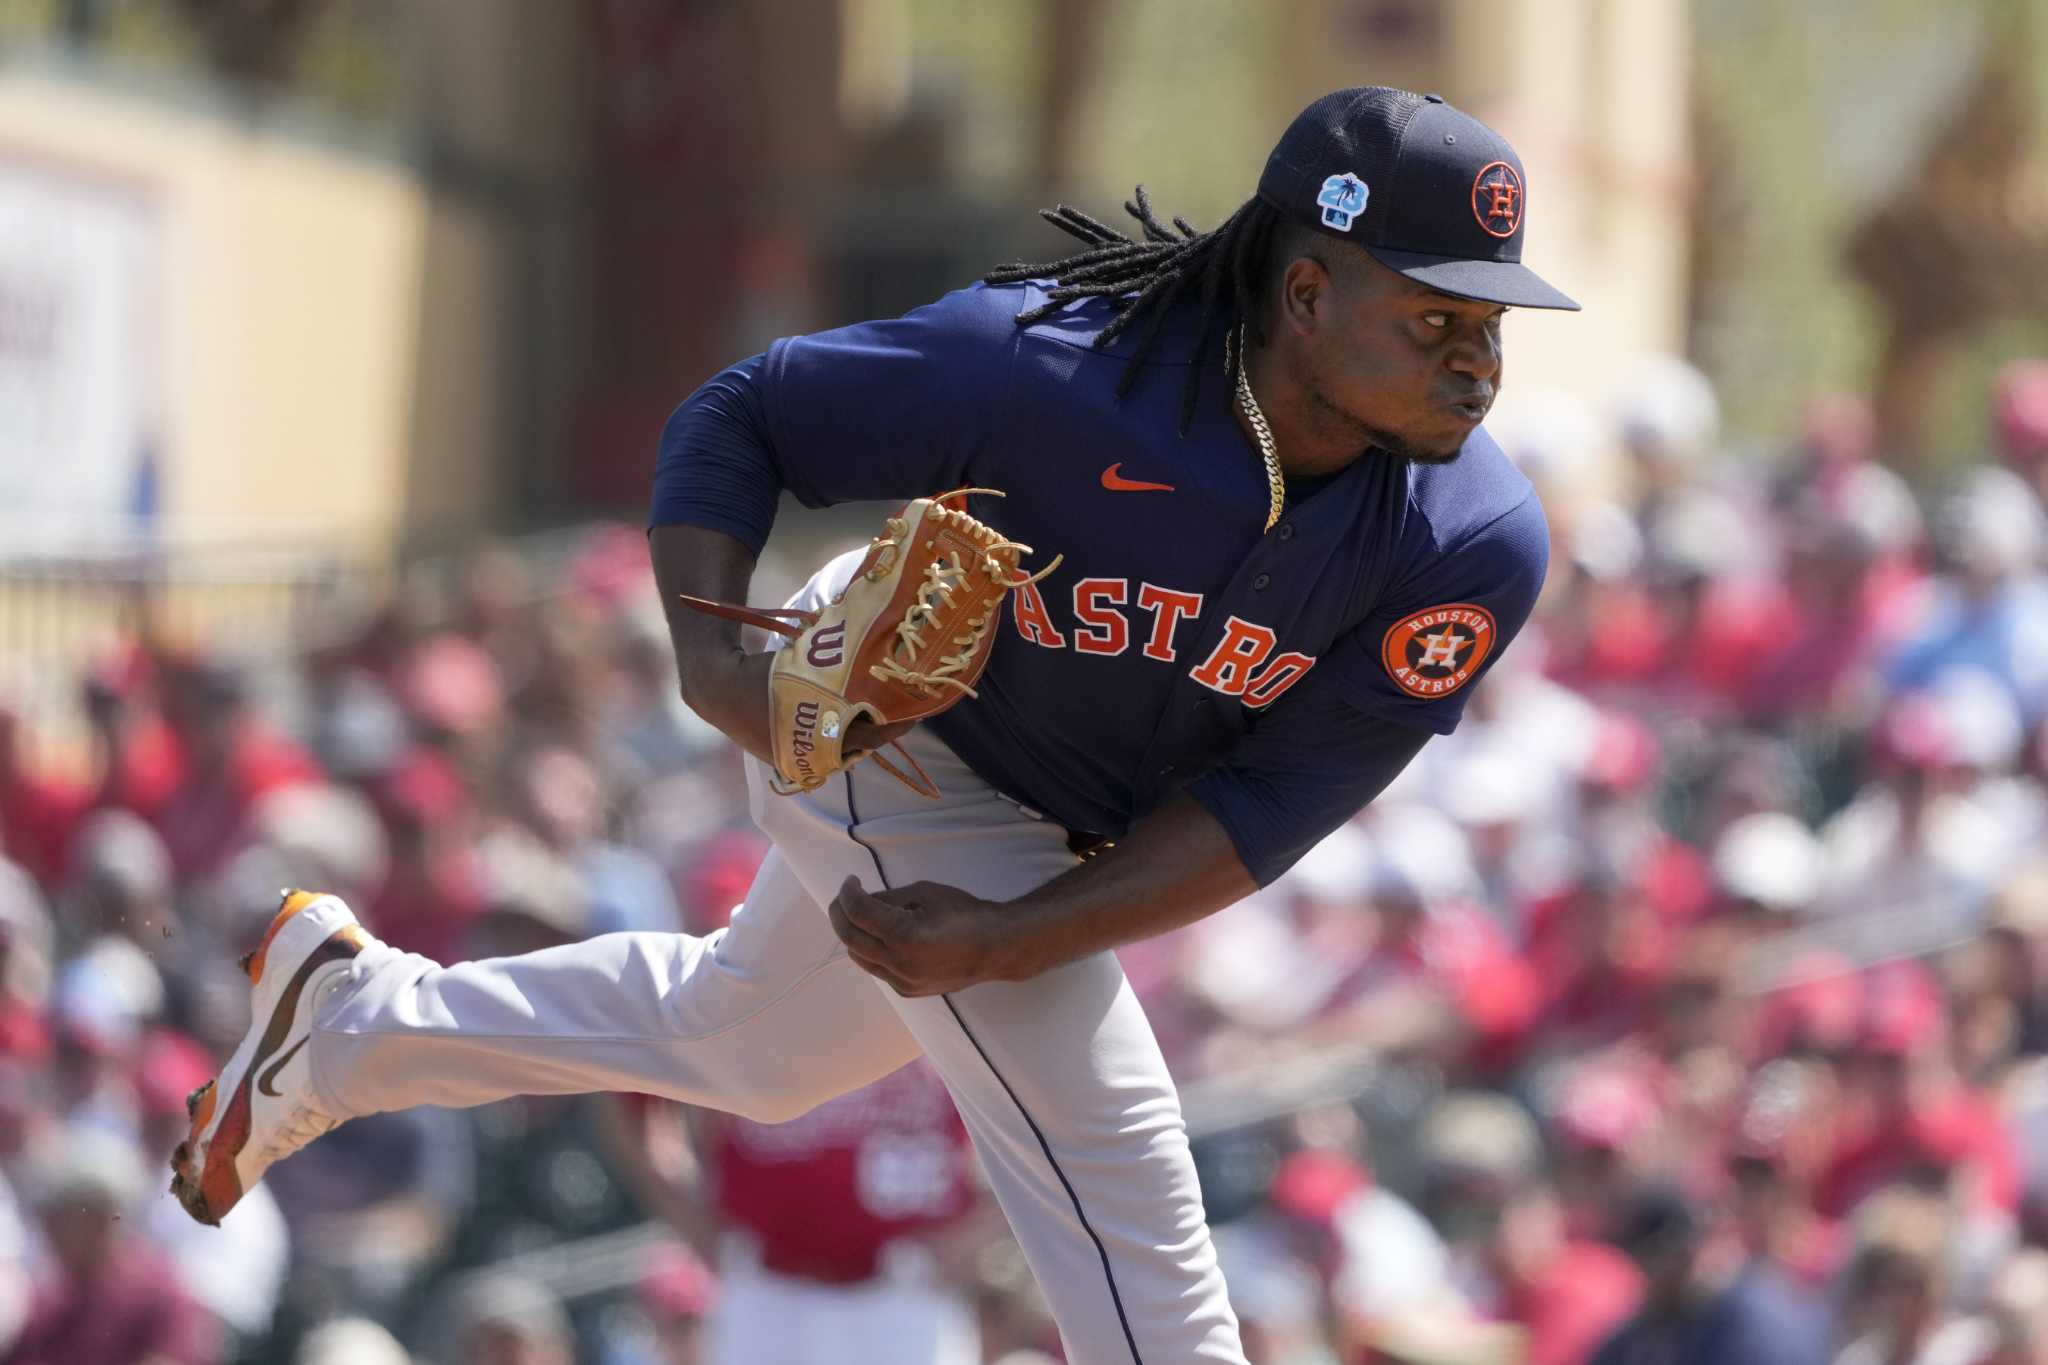 Houston Astros: Framber Valdez's All-Star debut is simply perfect